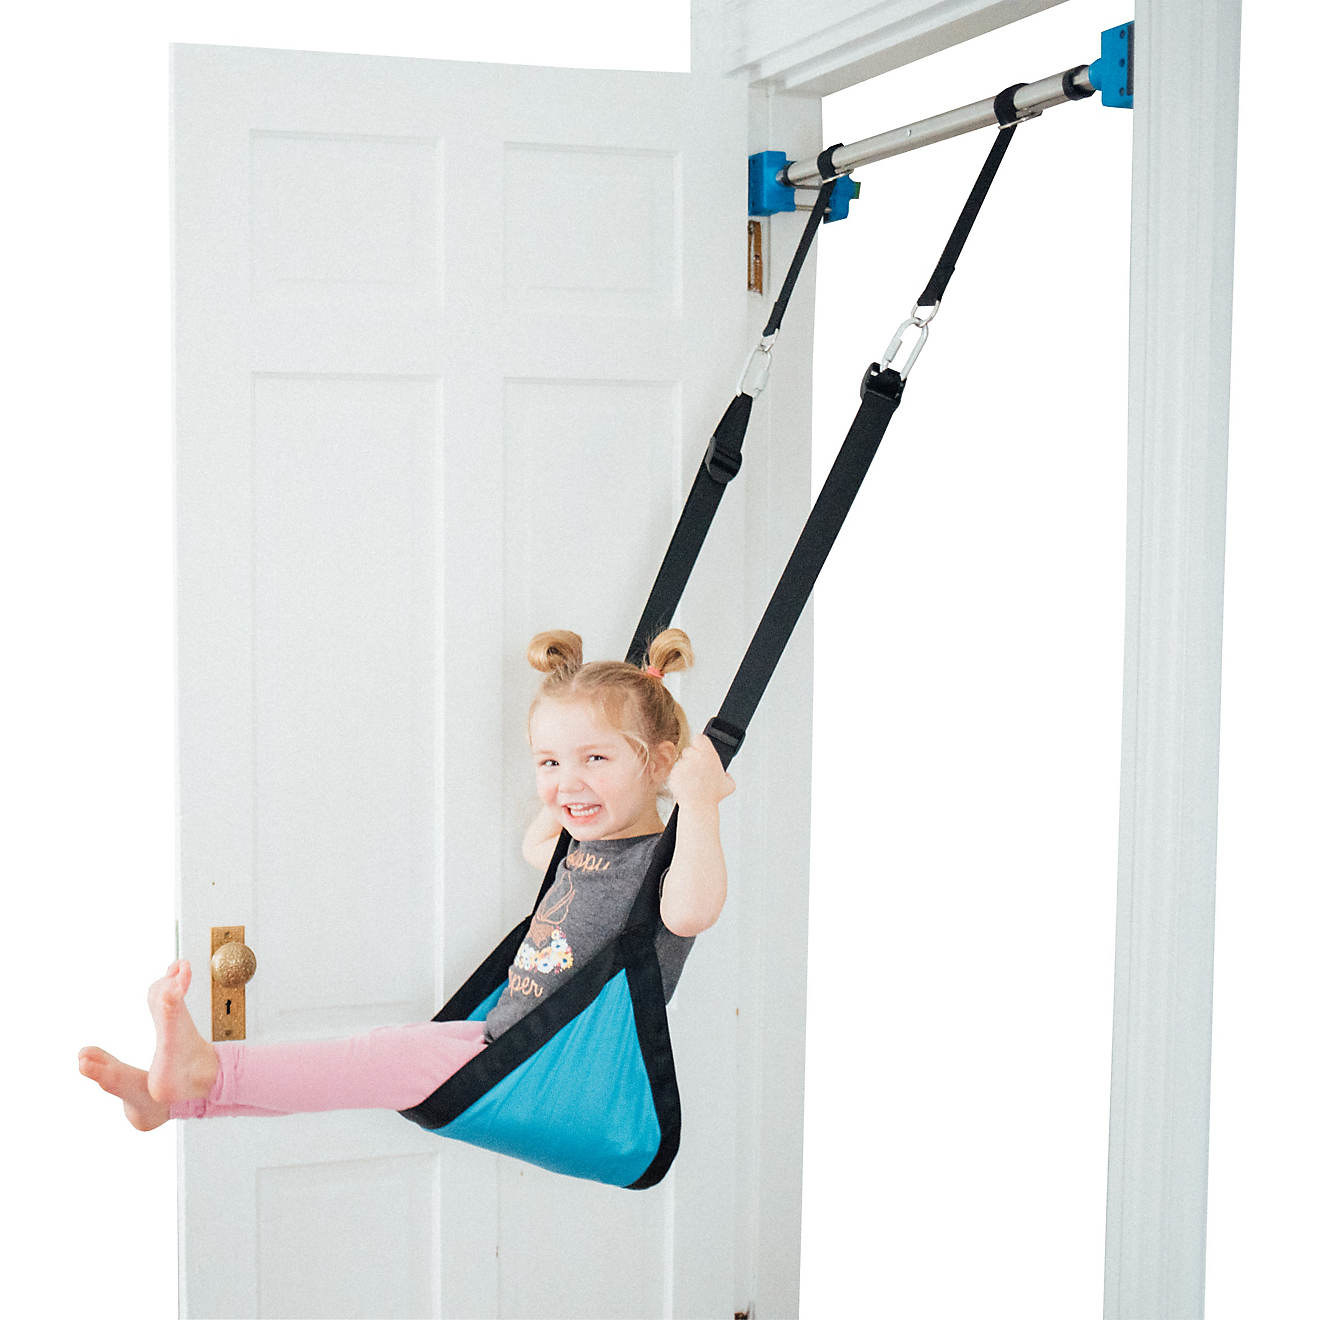 A child smiling while she uses the indoor swing